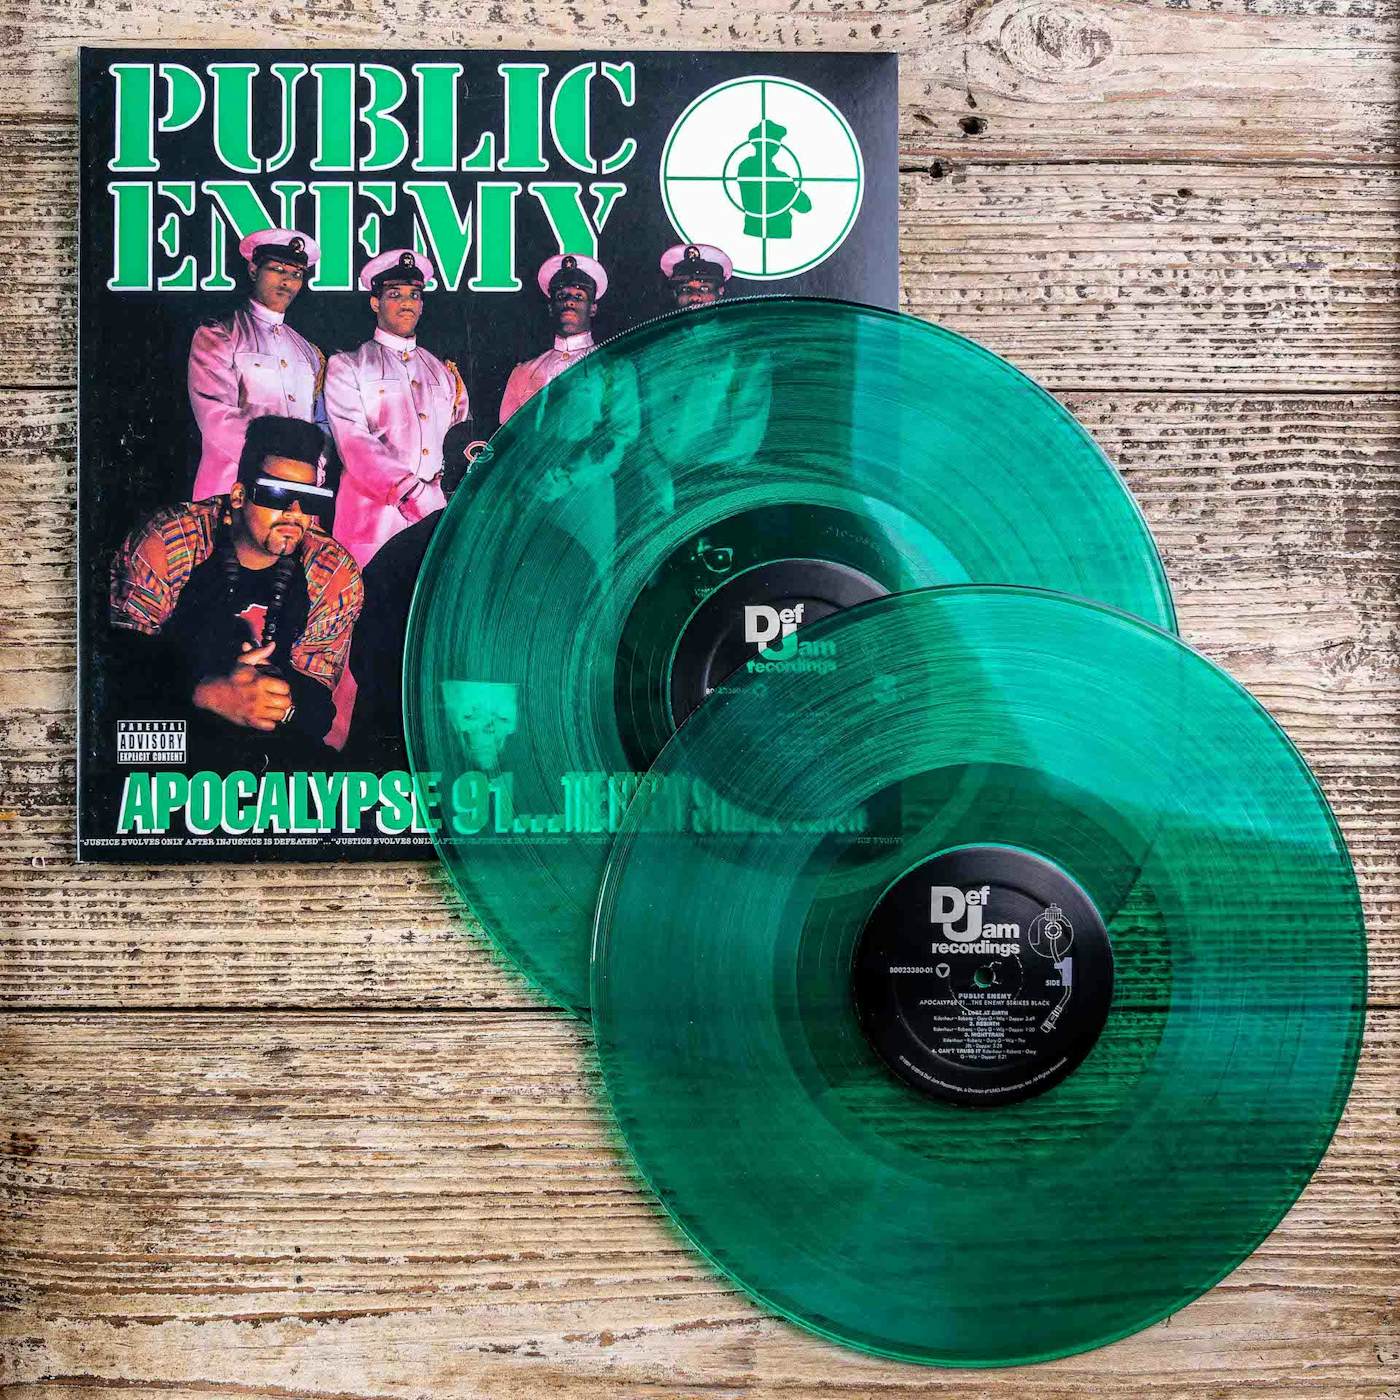 Public Enemy - 'Apocalypse 91: The Enemy Strikes Black' LP on Limited Edition Translucent Green Vinyl + Softcover Book